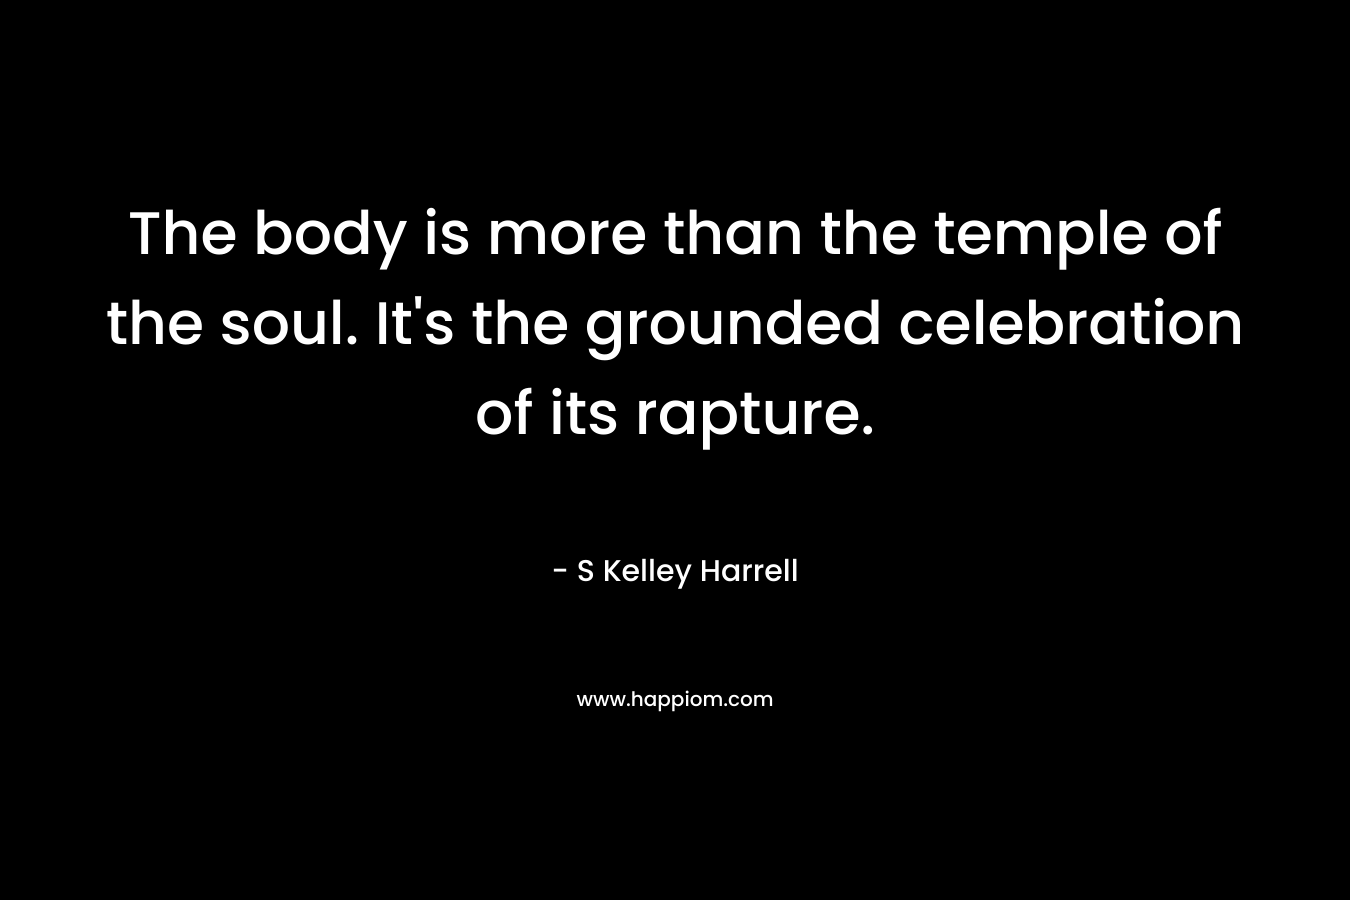 The body is more than the temple of the soul. It's the grounded celebration of its rapture.